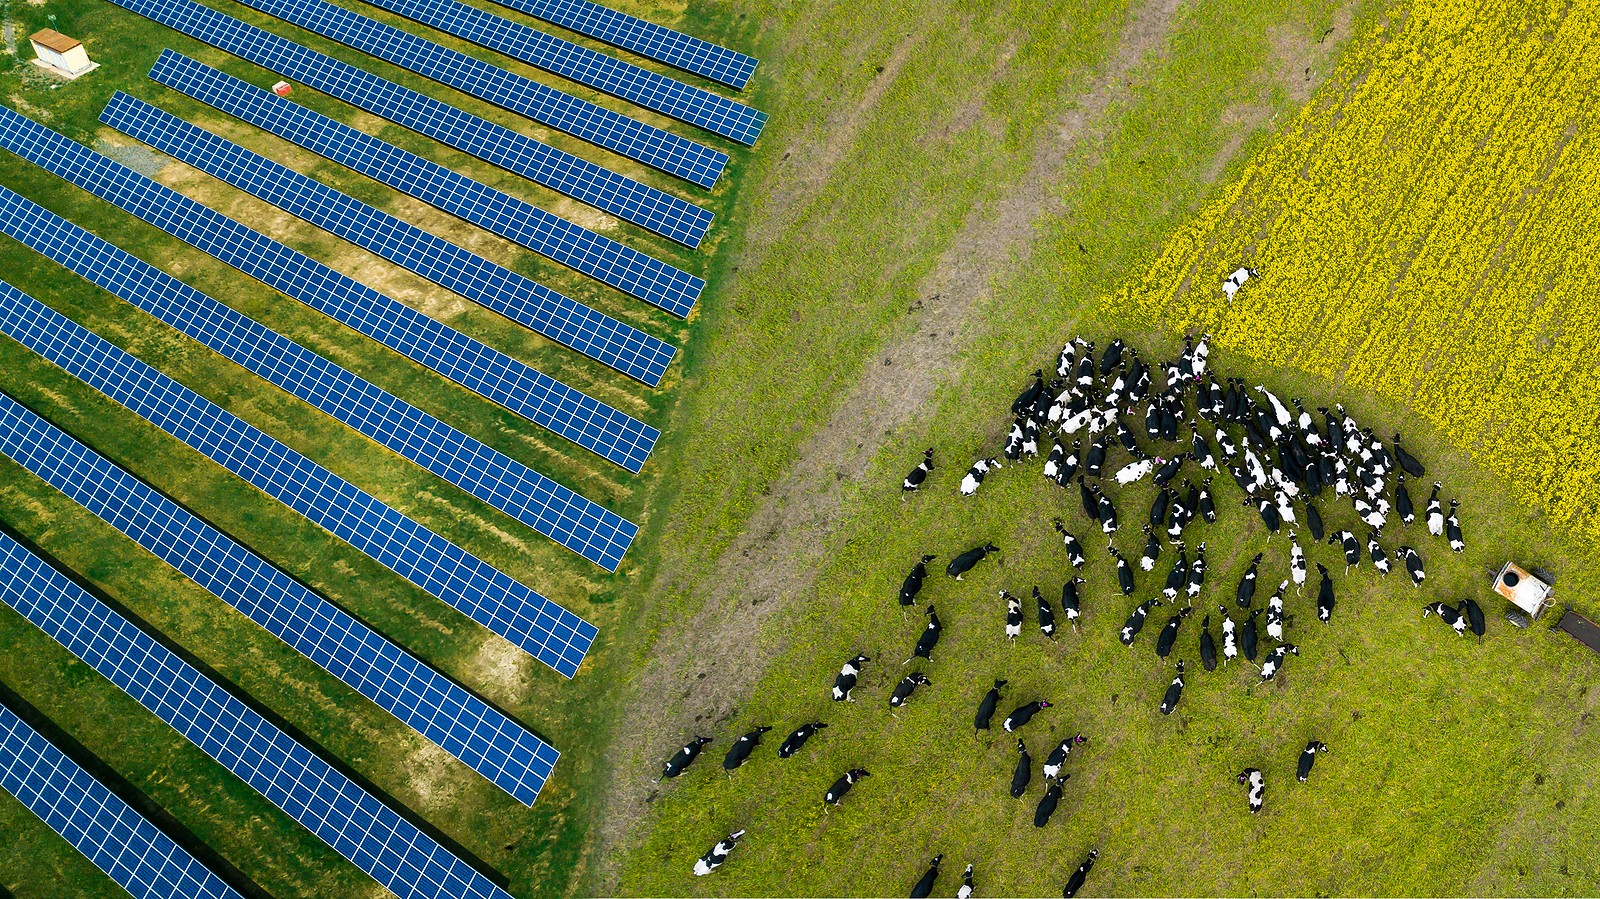 Aerial view of black-and-white-cows grazing in a green pasture next to rows of solar panels on a solar farm.